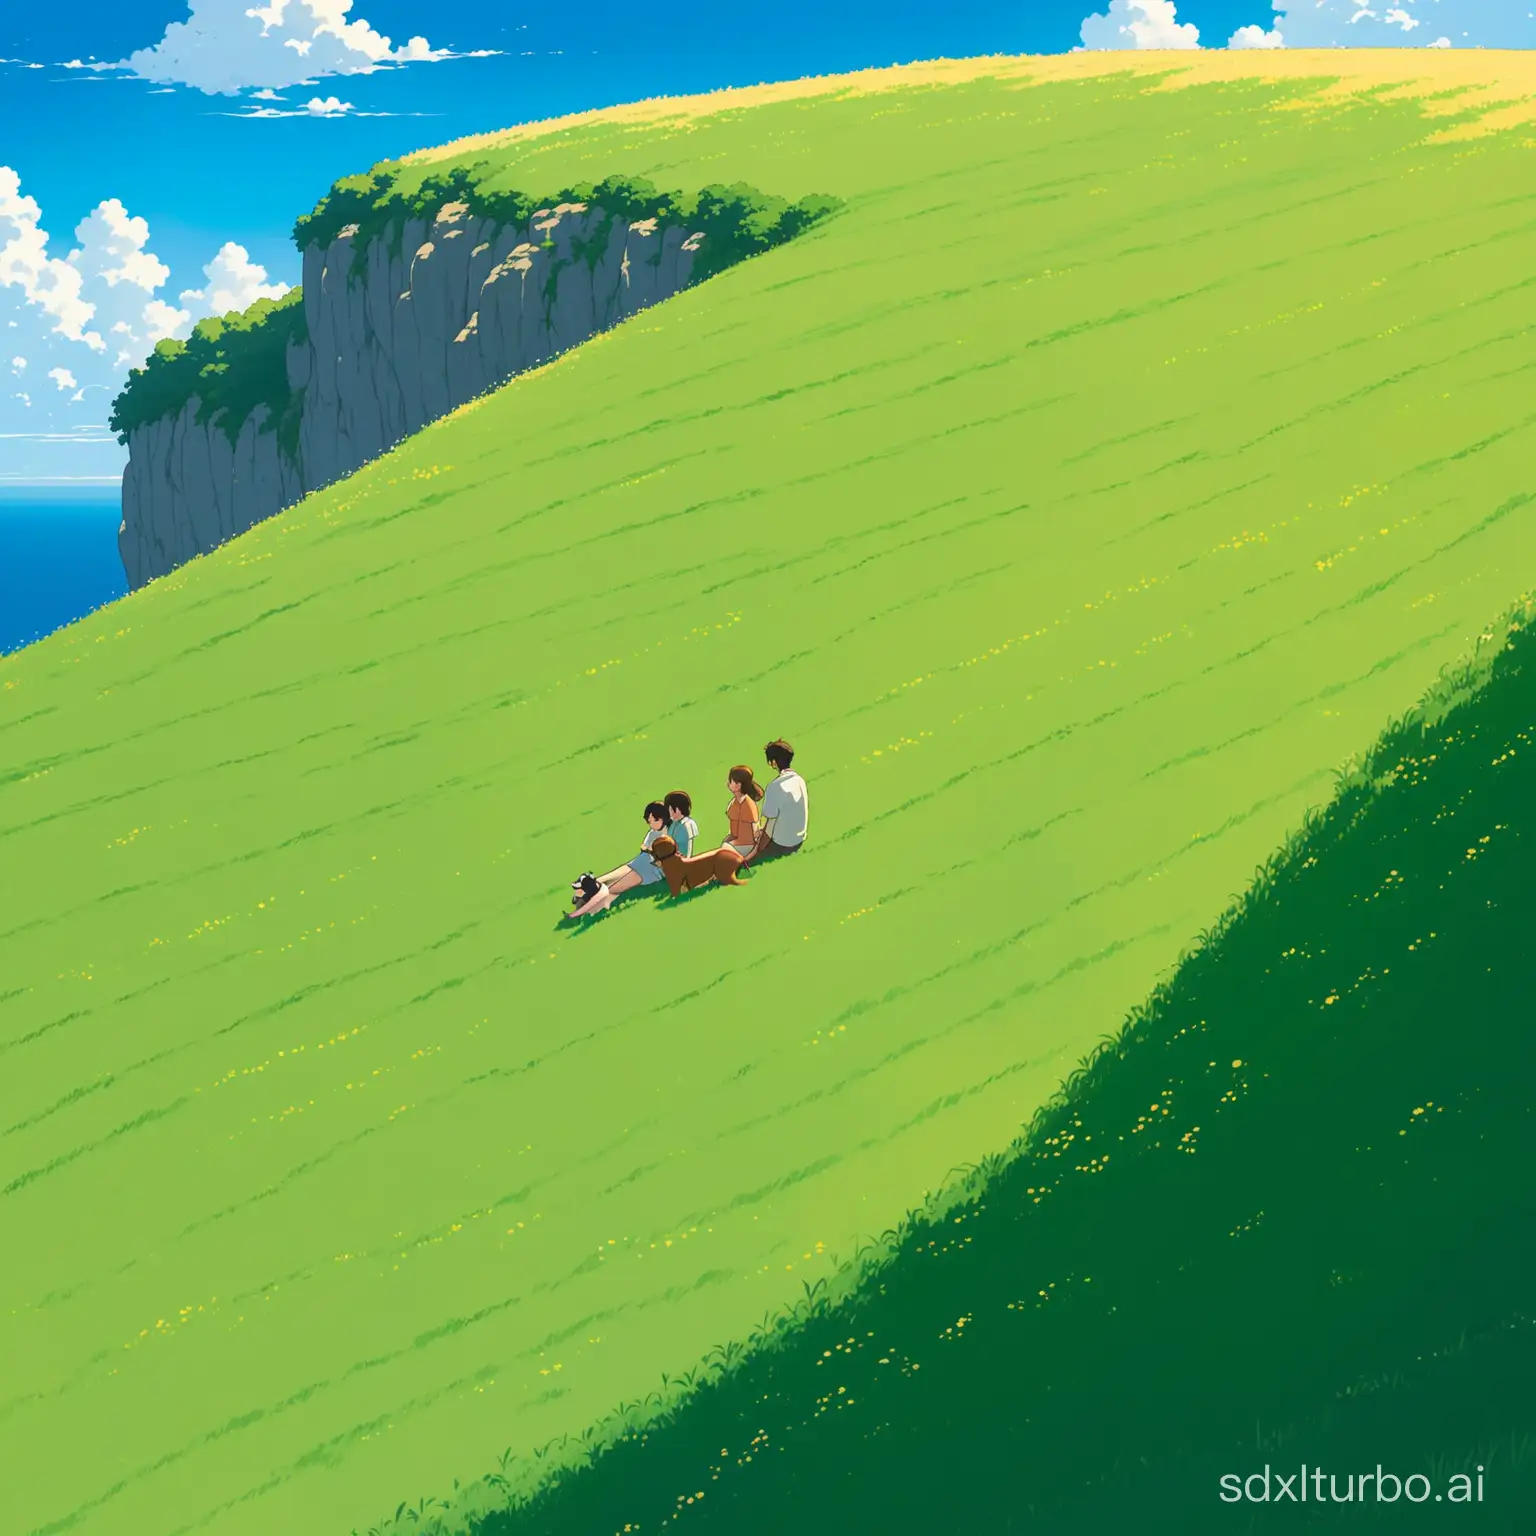 Couple-Relaxing-with-Dog-in-Studio-GhibliInspired-Landscape